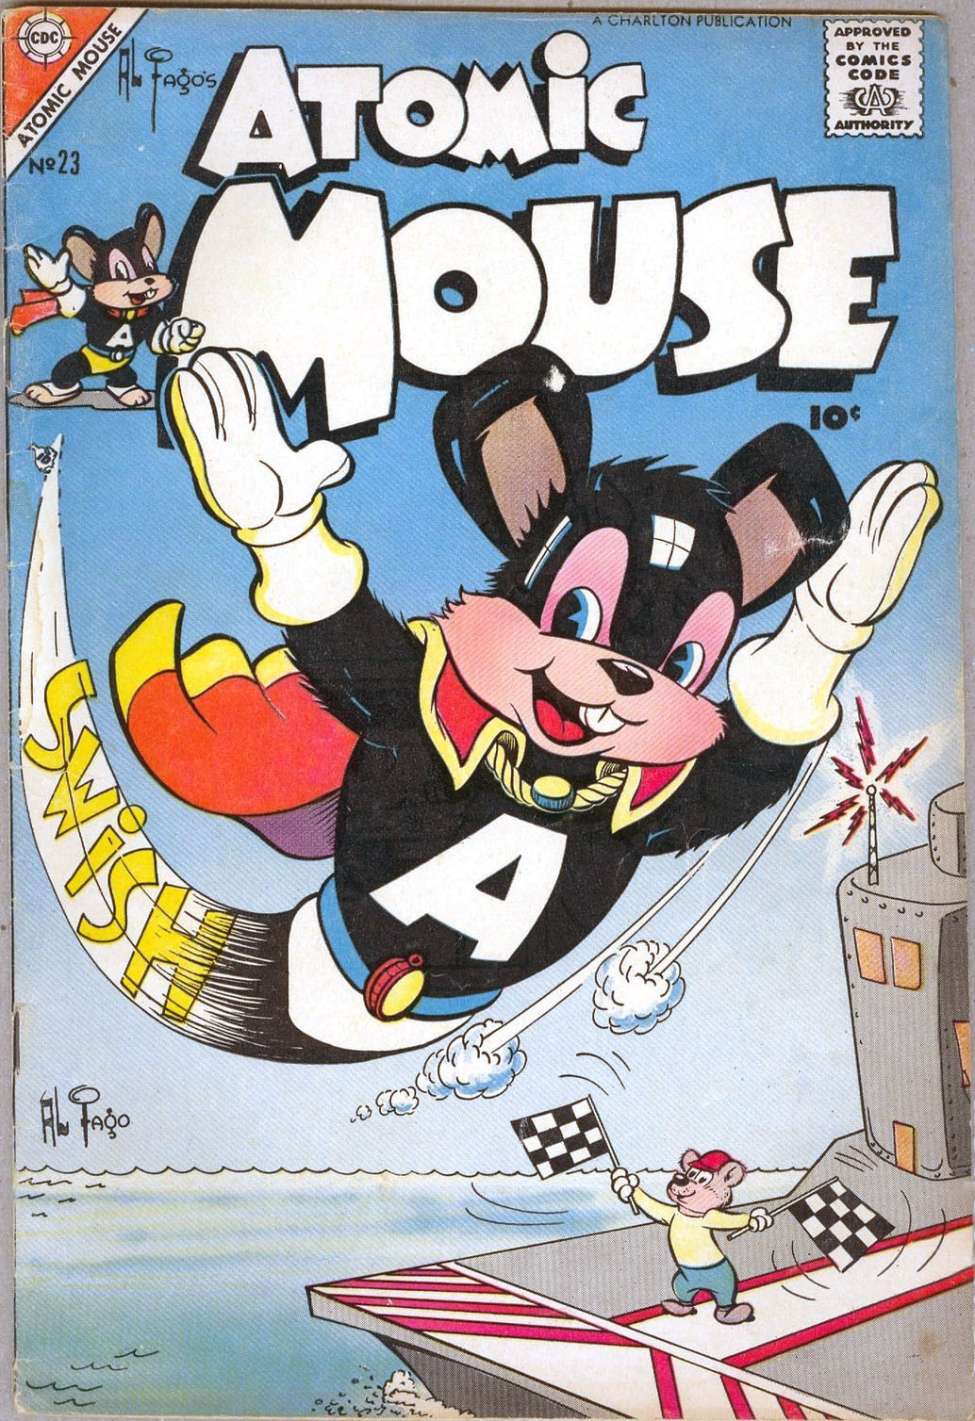 Book Cover For Atomic Mouse 23